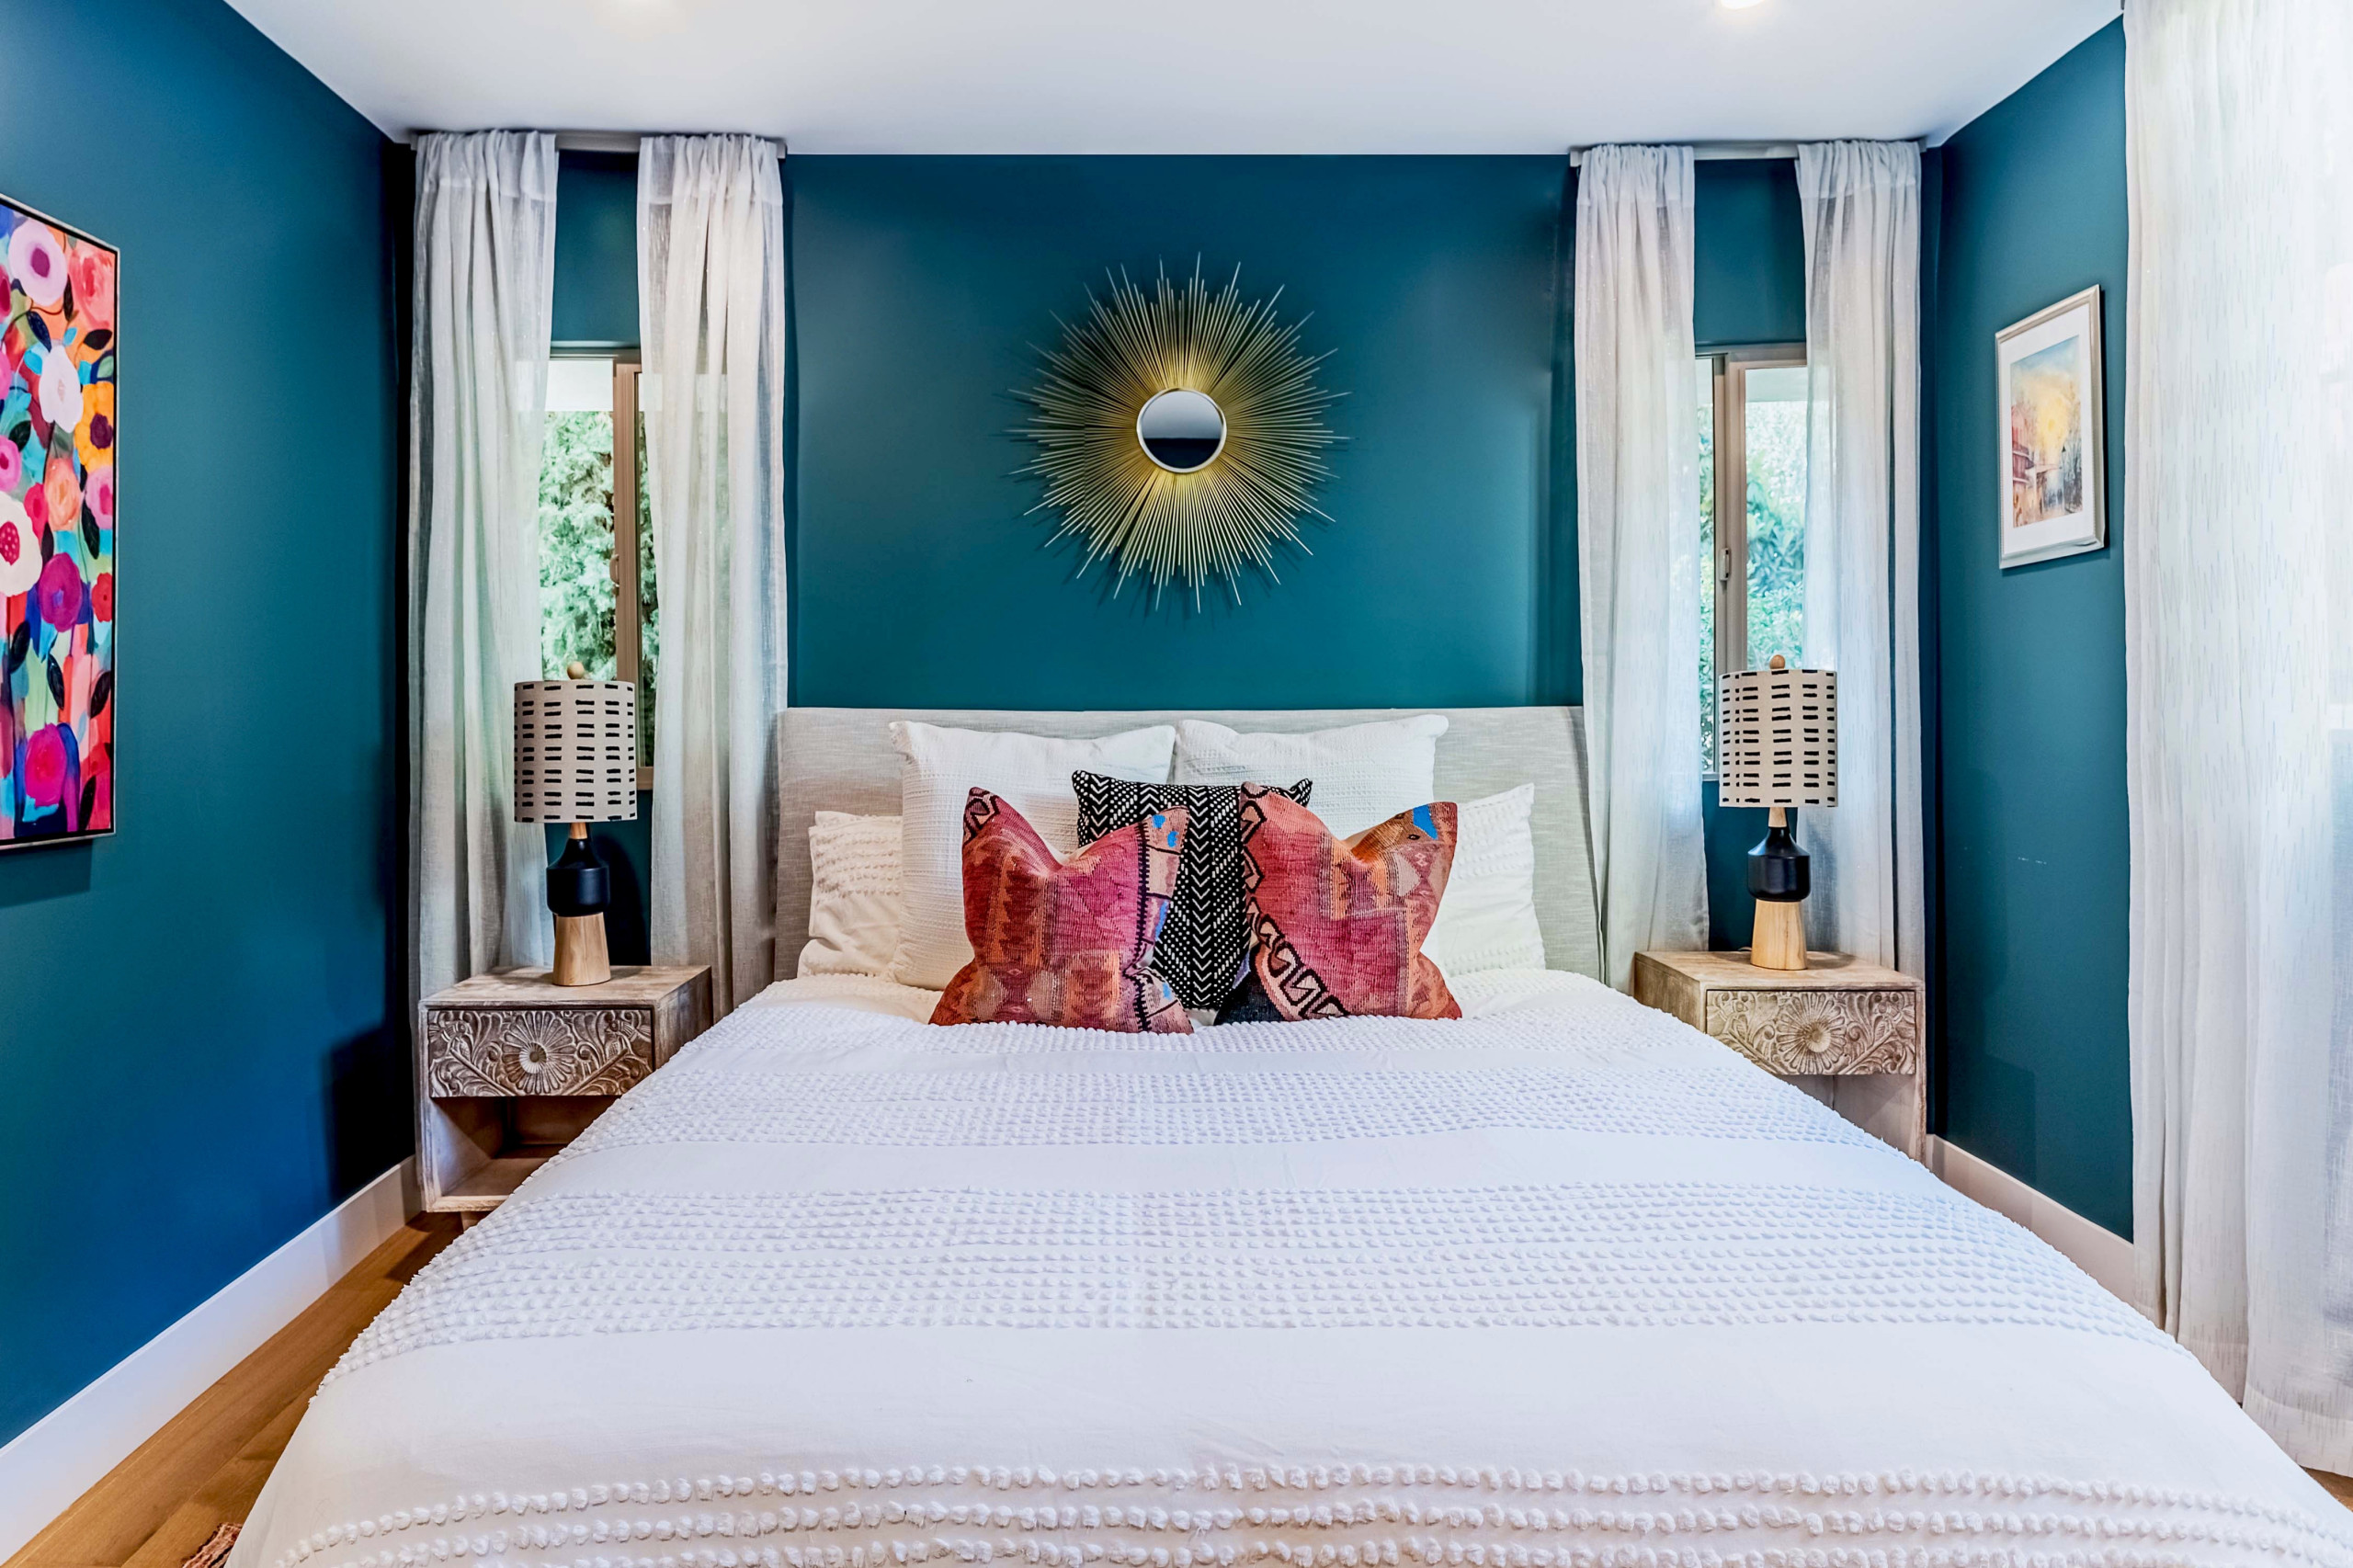 75 Turquoise Bedroom Ideas You'll Love - February, 2023 | Houzz